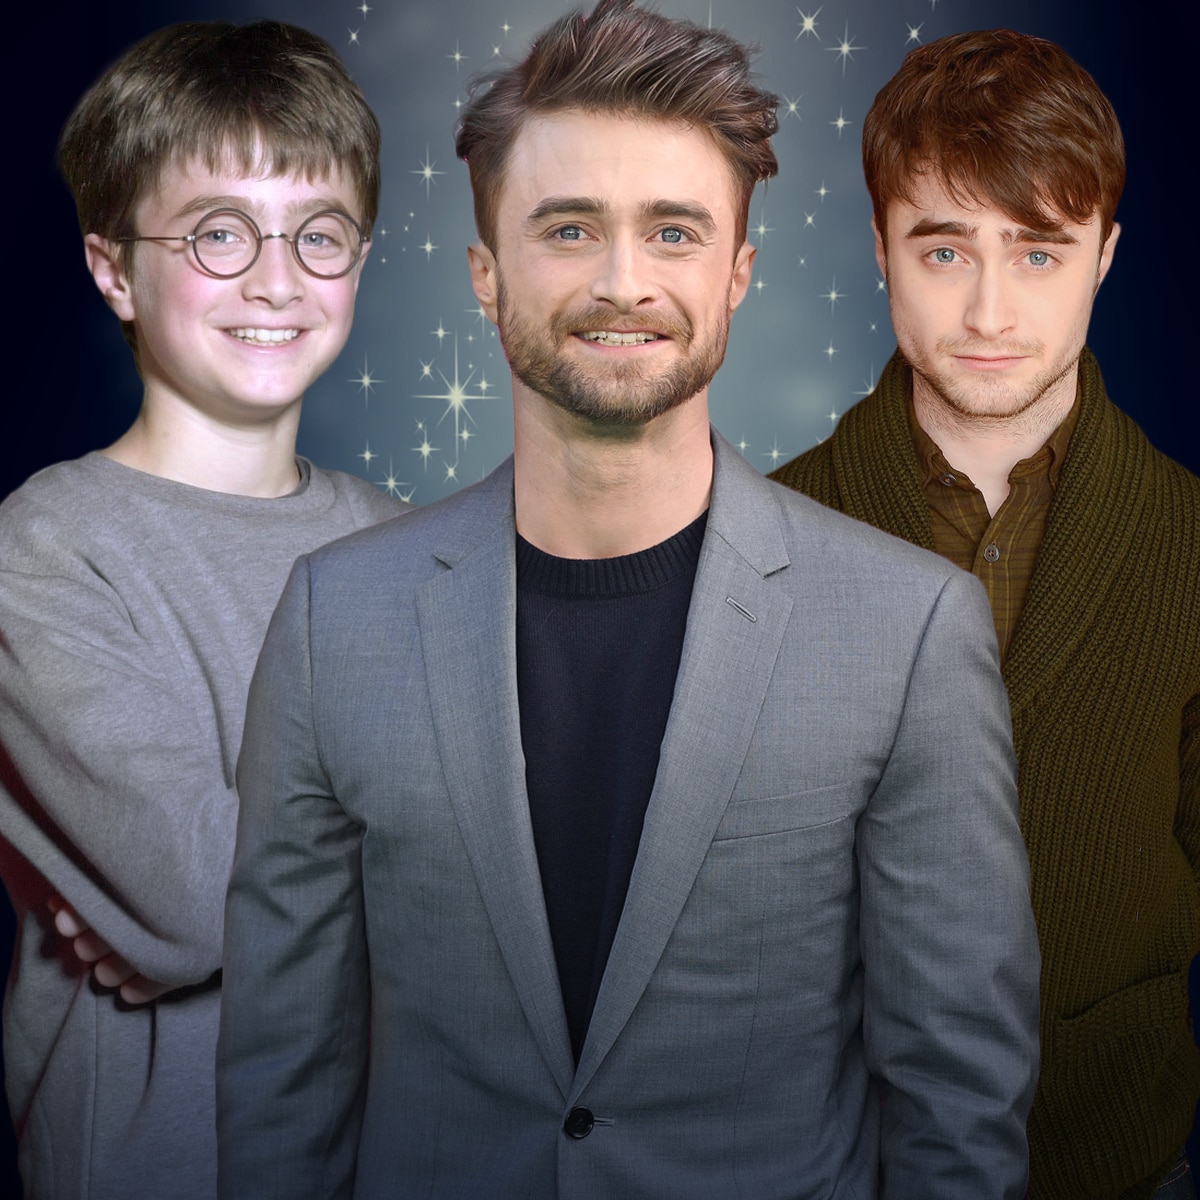 We Solemnly Swear You'll Want to See Daniel Radcliffe's Transformation ...